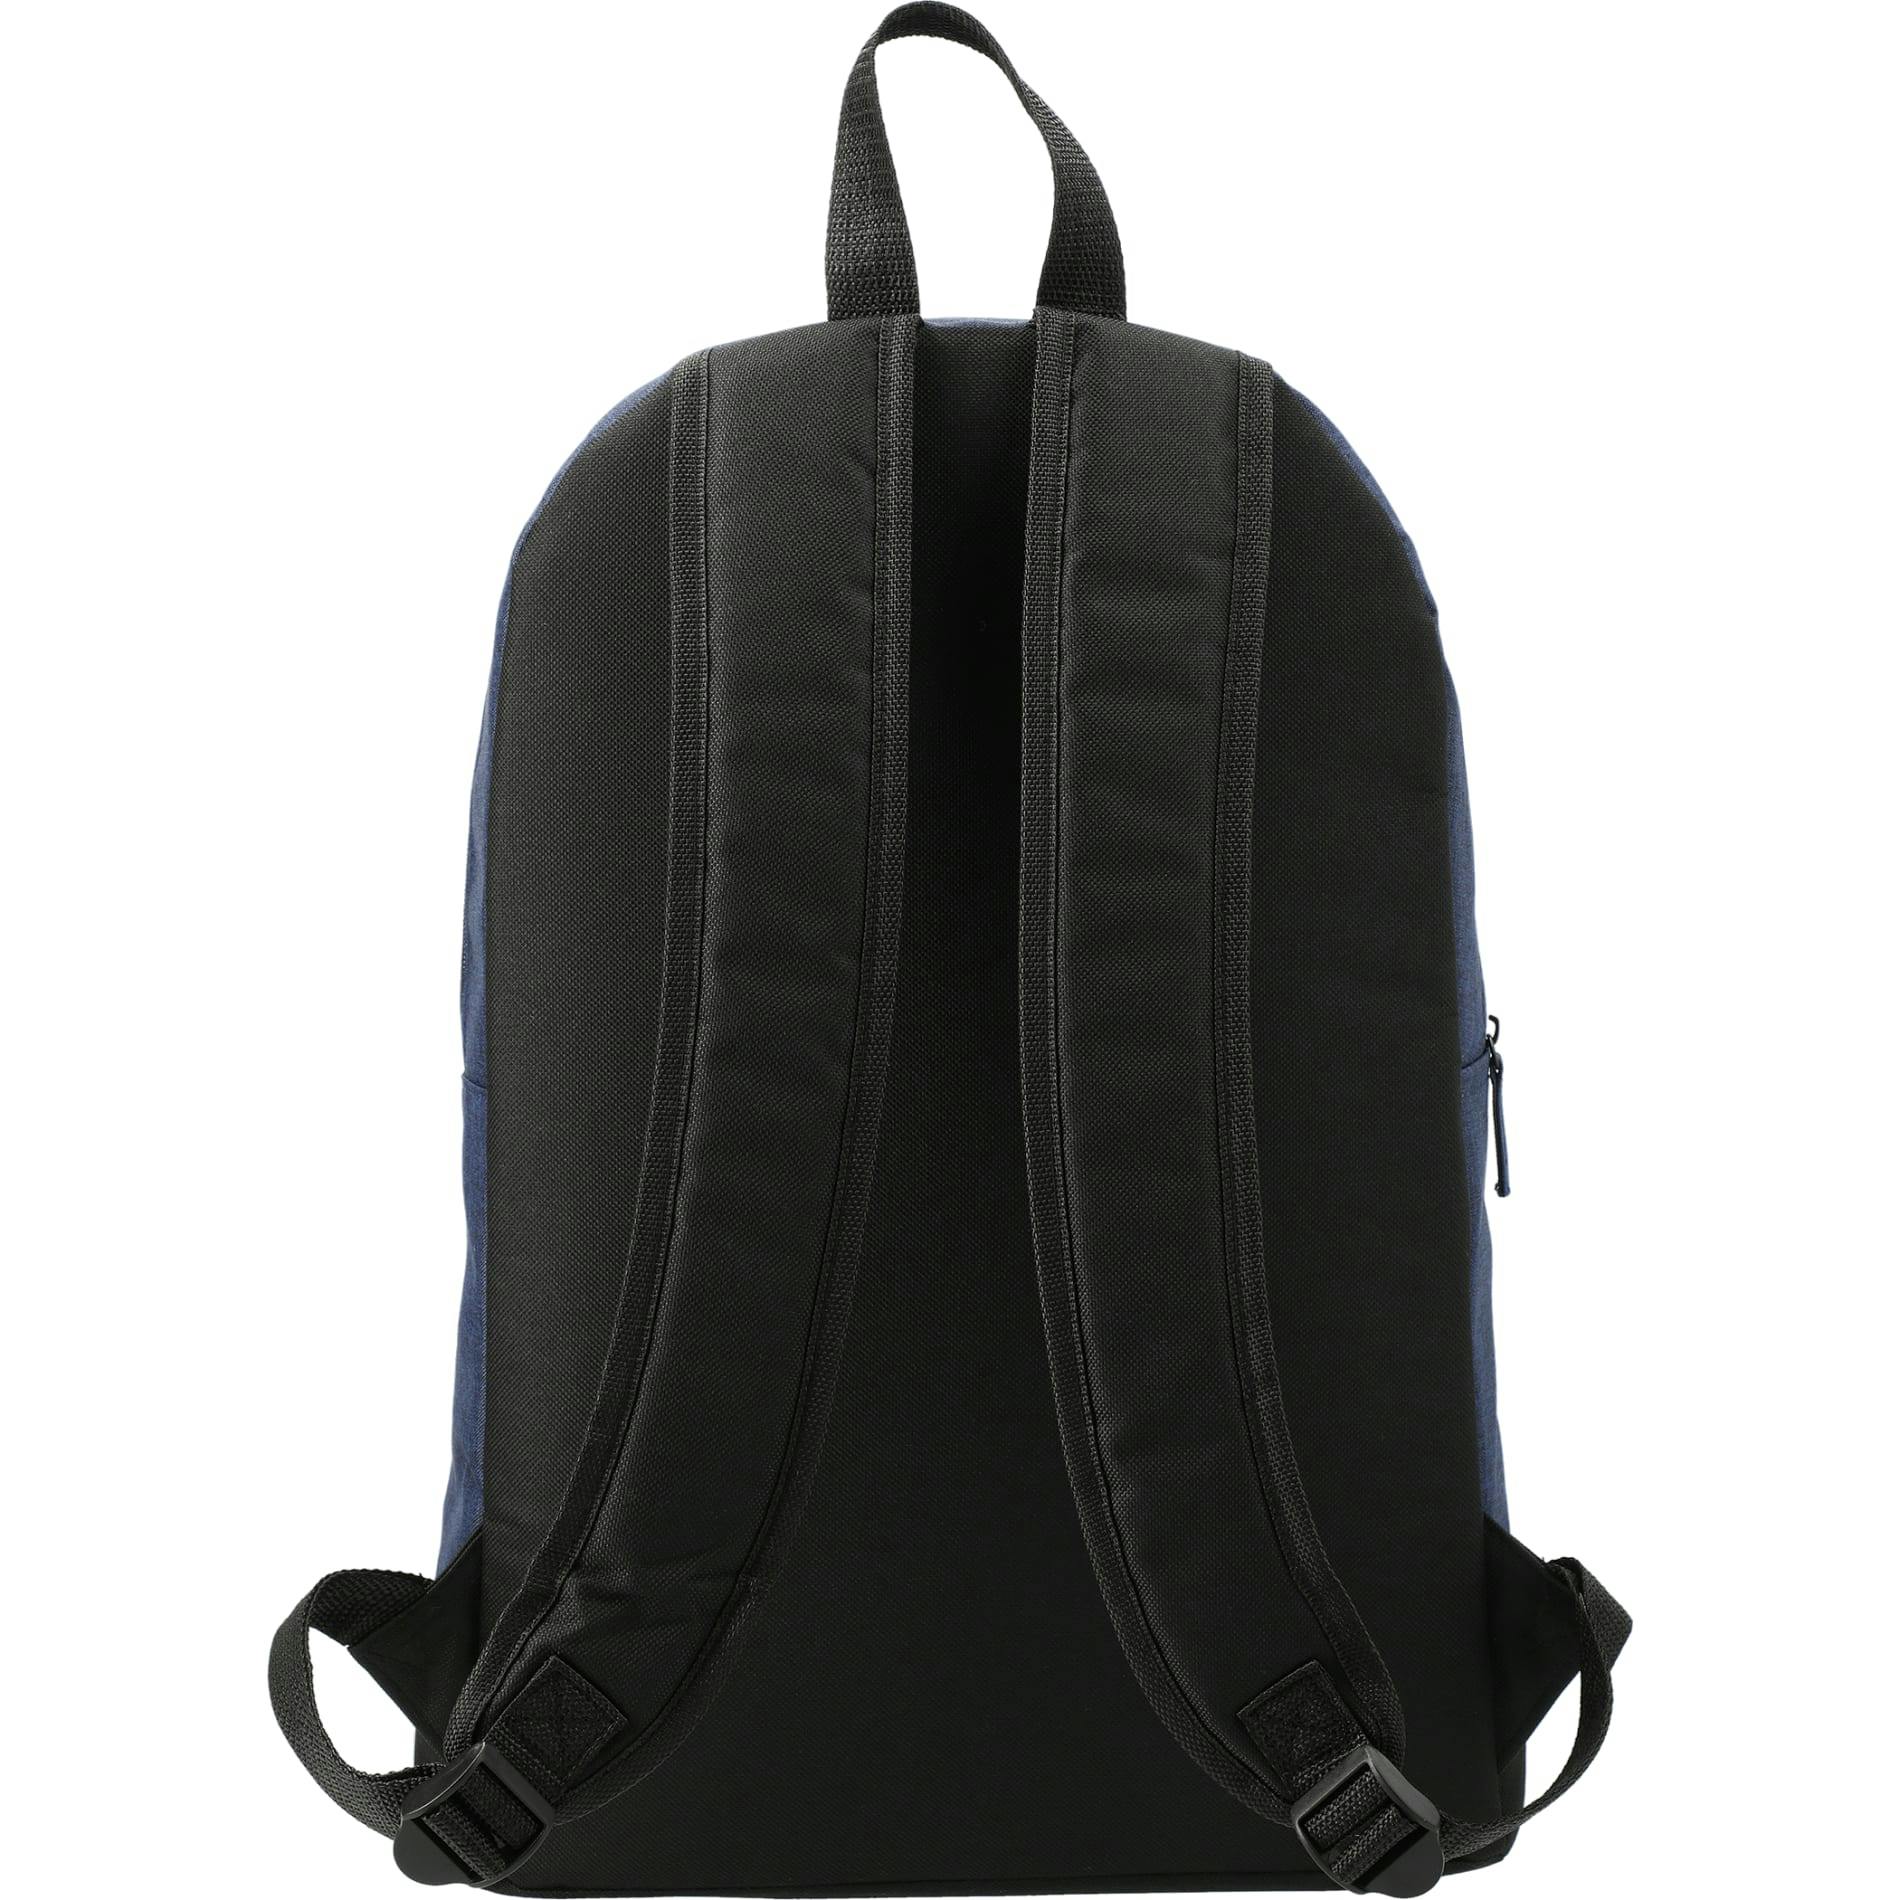 Graphite Dome 15" Computer Backpack - additional Image 2